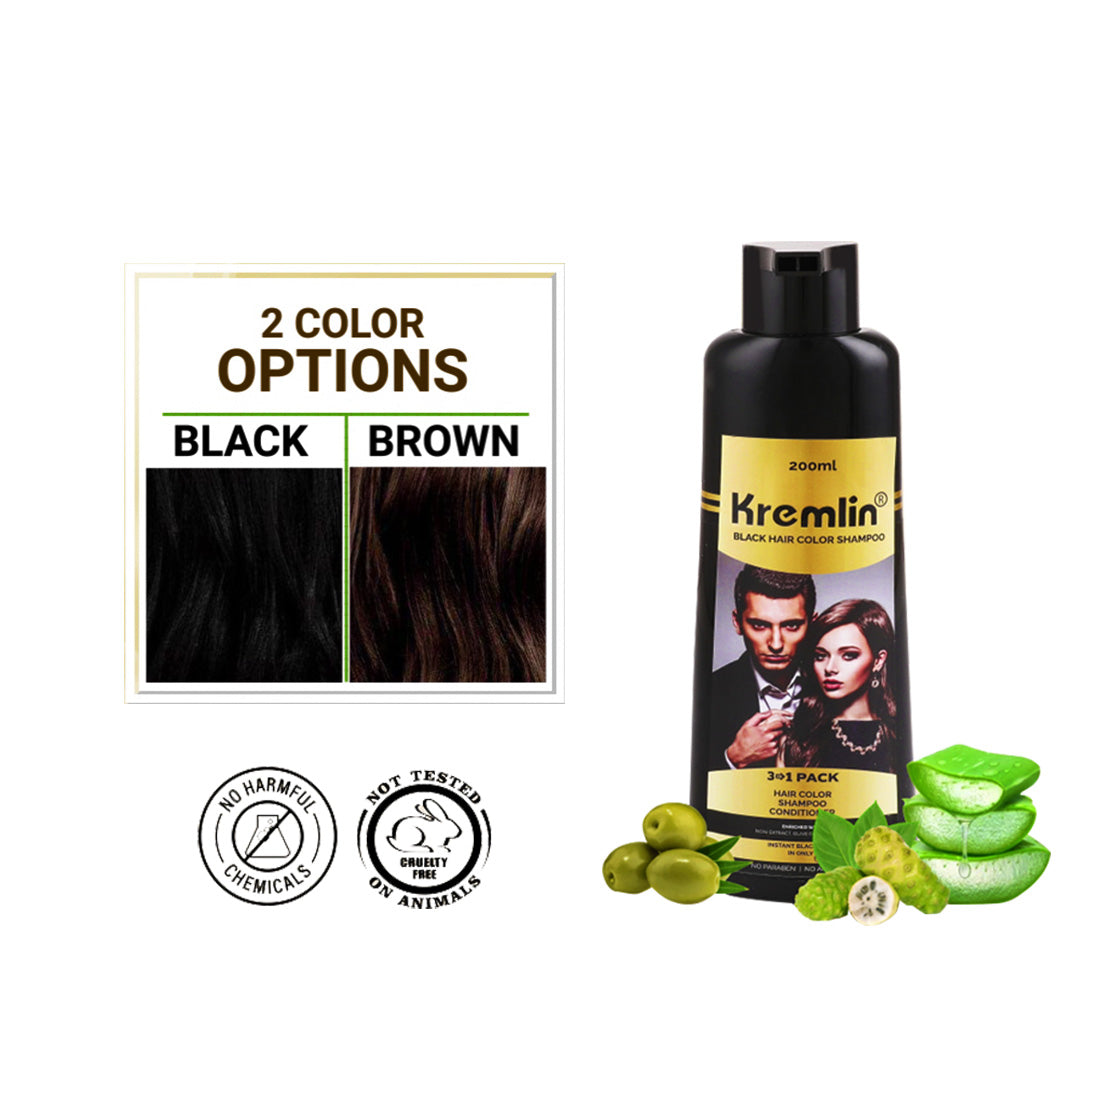 Kremlin 3 In 1 Unisex Hair Color Shampoo Conditioner for Instant Color